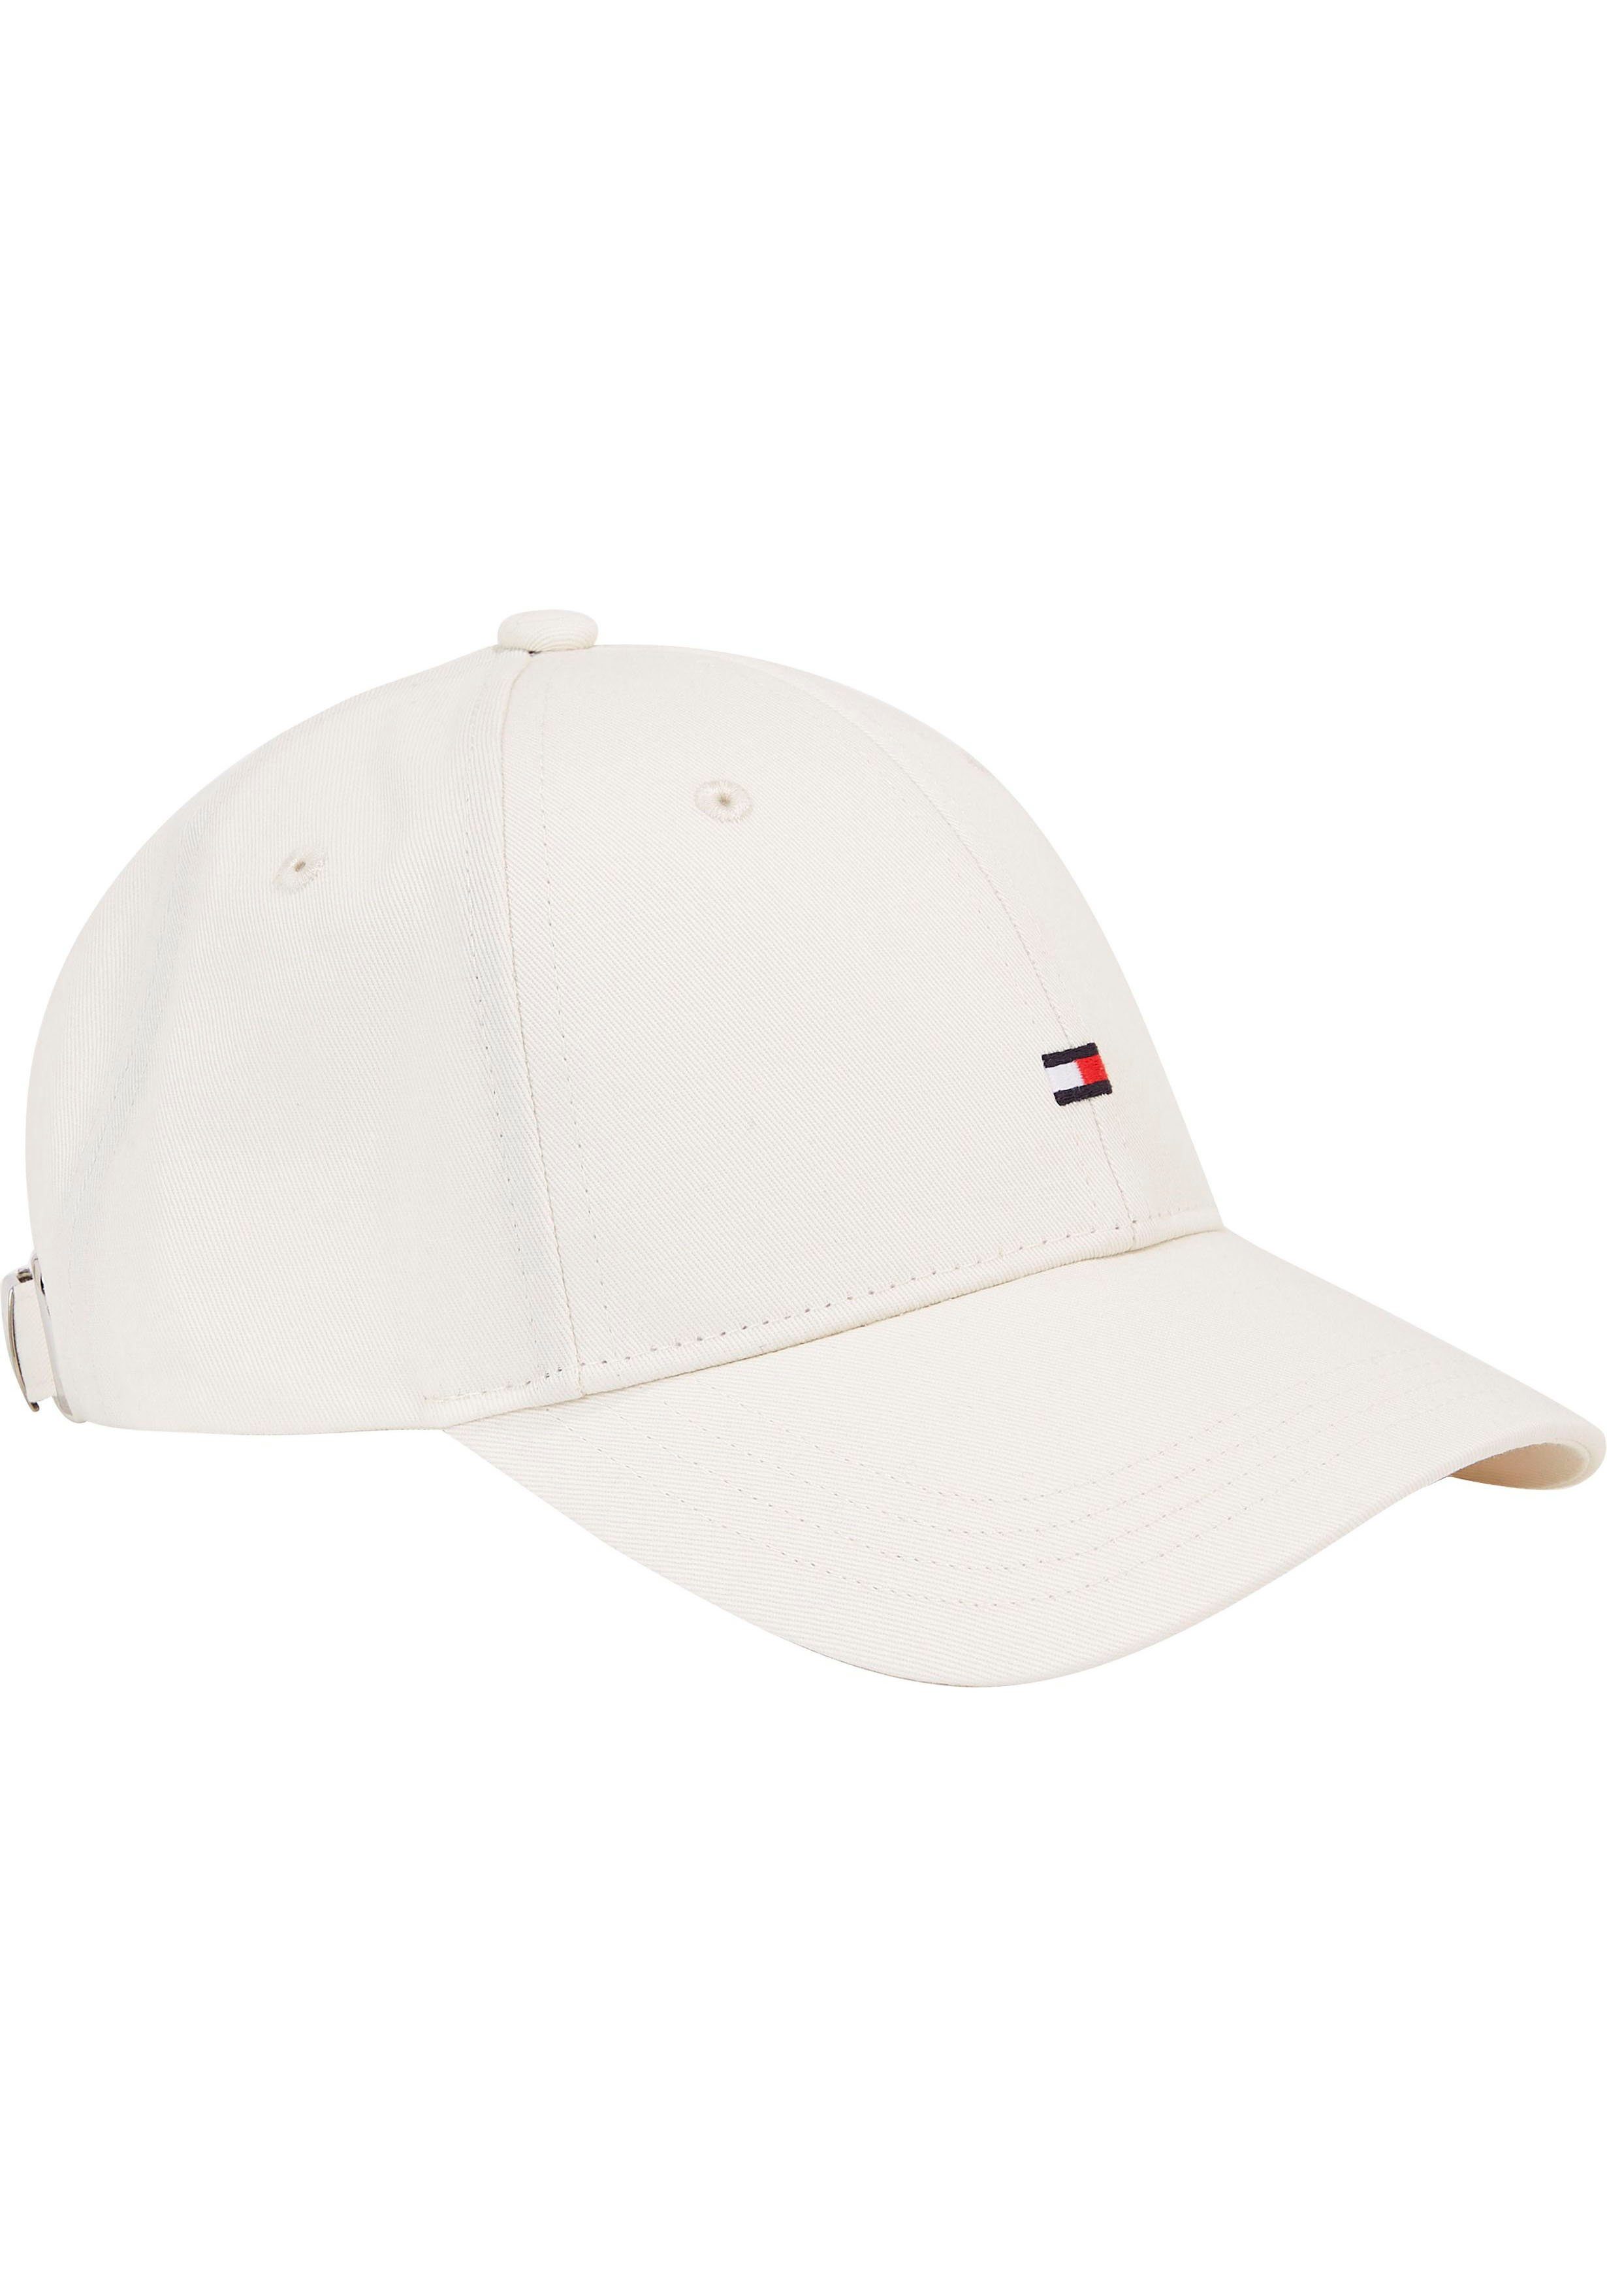 FLAG Calico Klemmverschluss SMALL CAP mit Cap Fitted Hilfiger Tommy